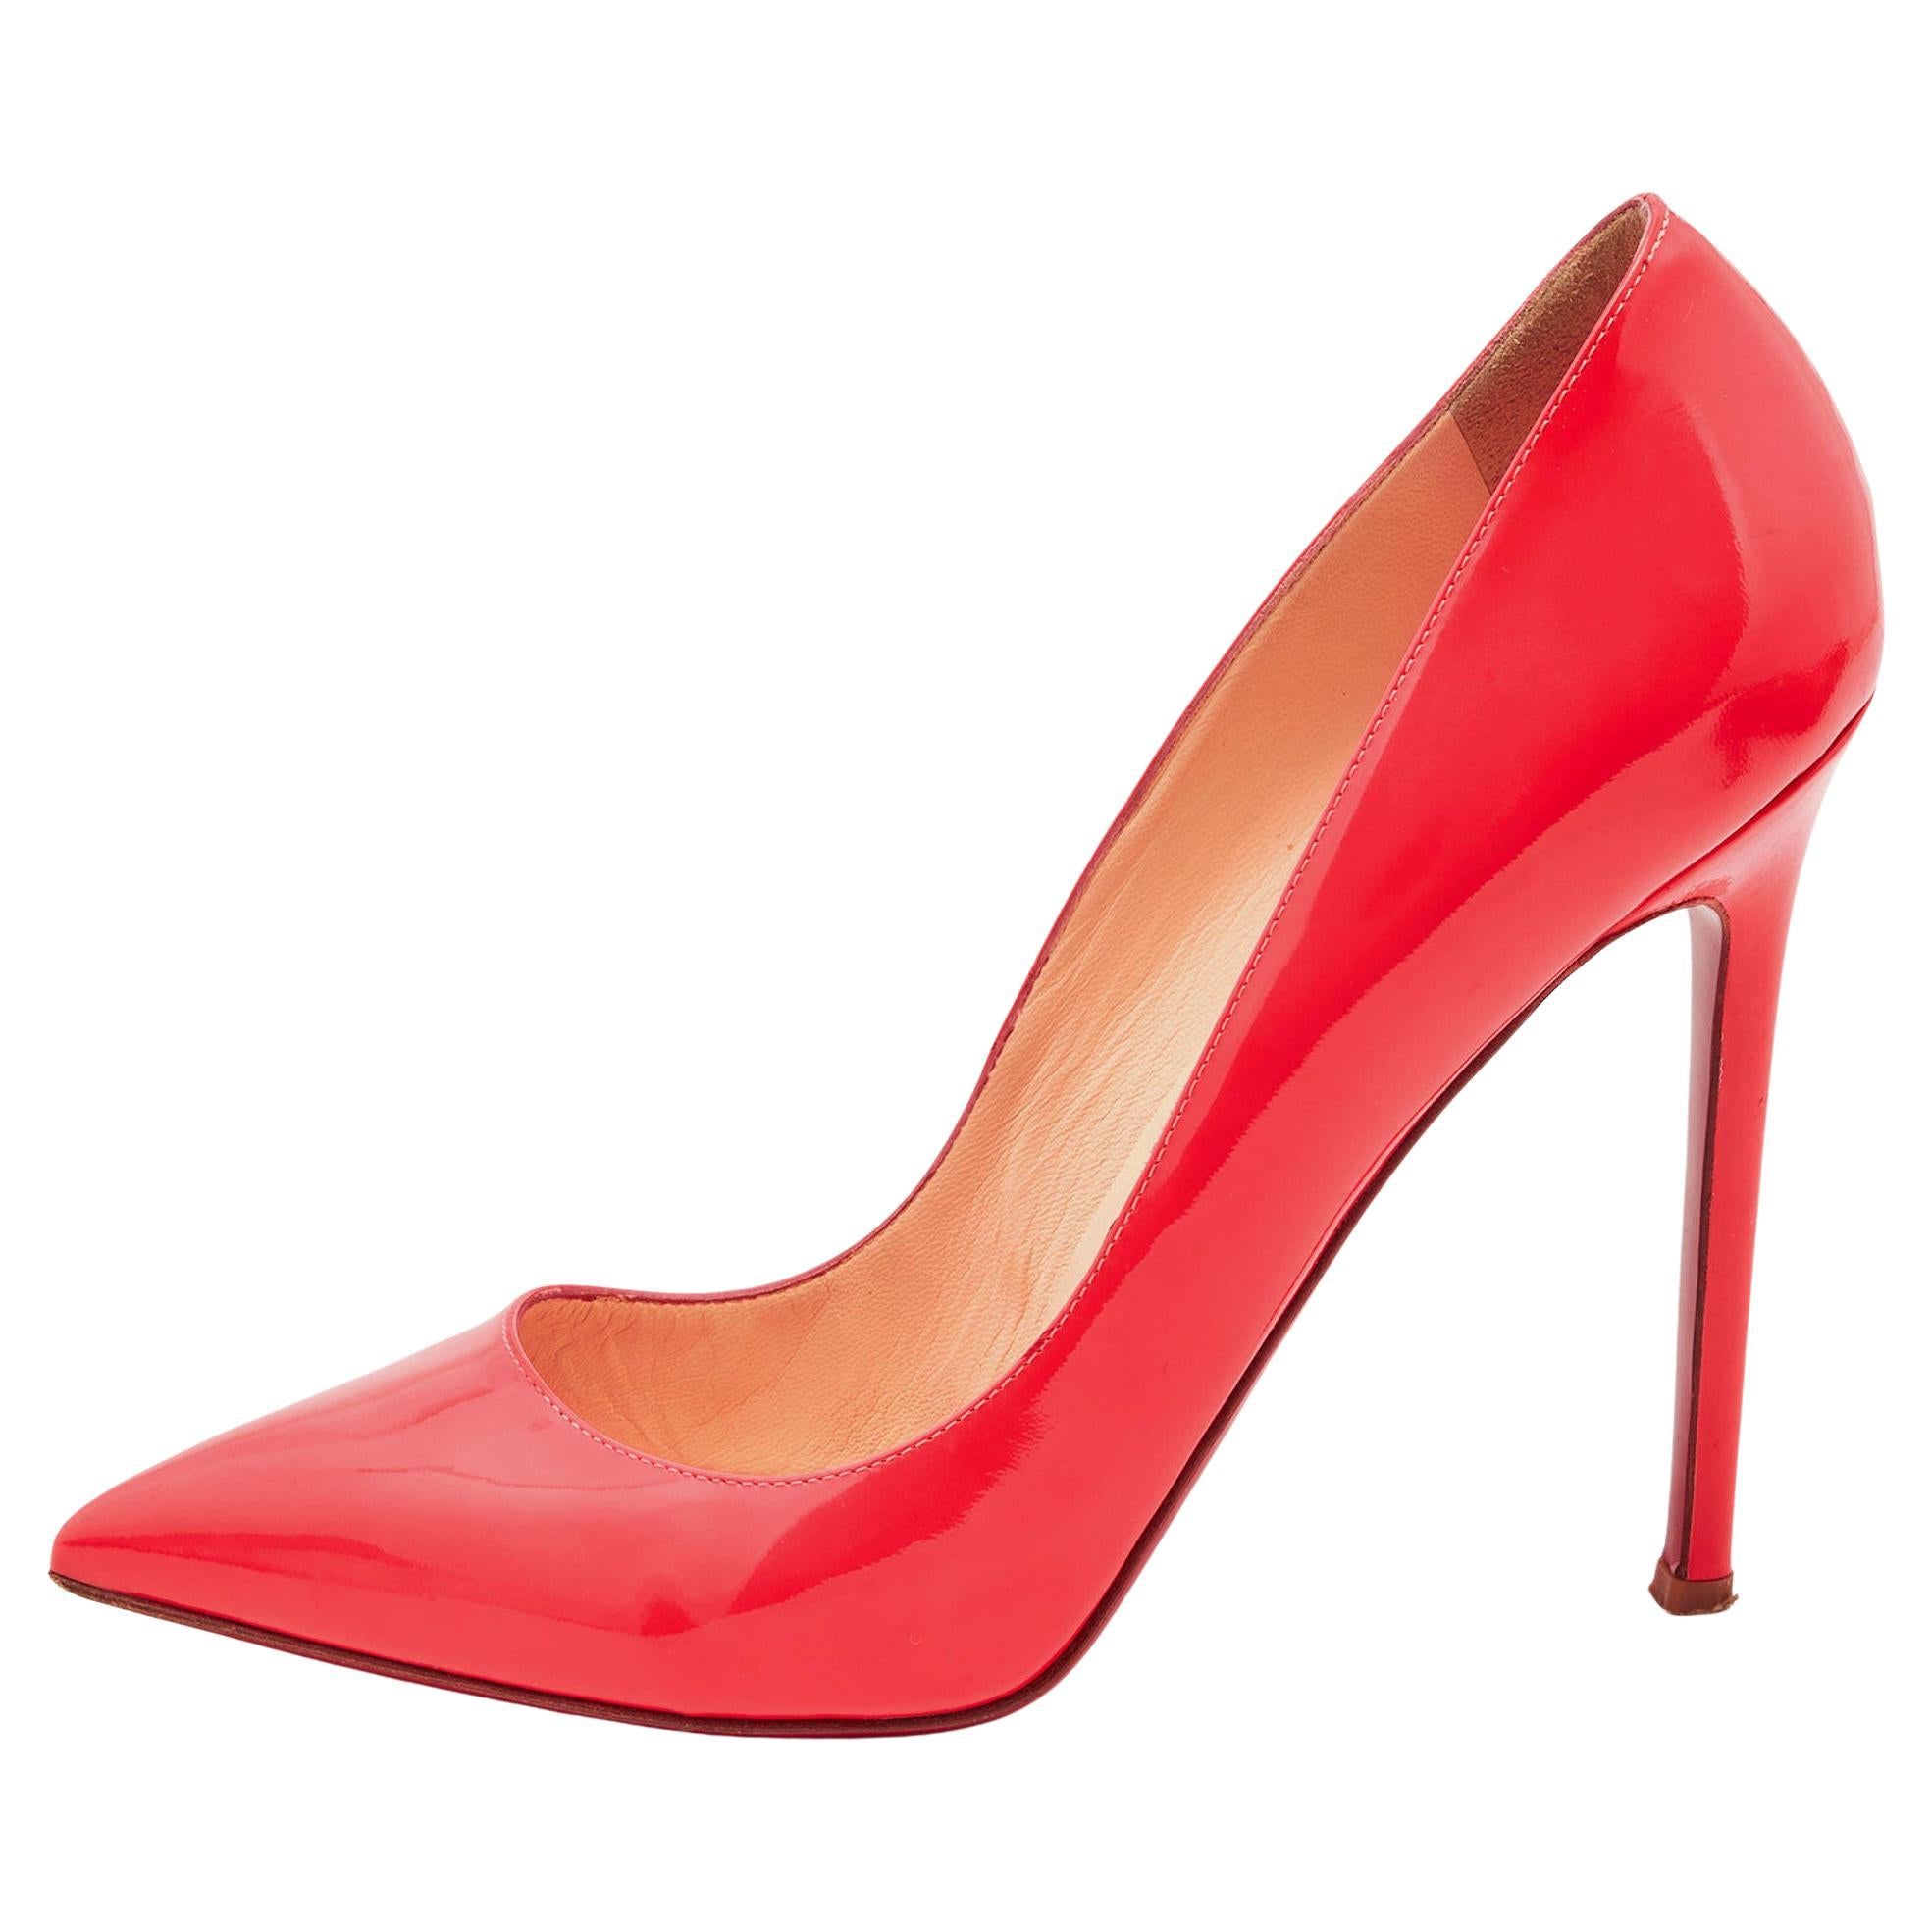 Christian Louboutin Neon Coral Patent So Kate Pointed Toe Pumps Size 40.5 For Sale